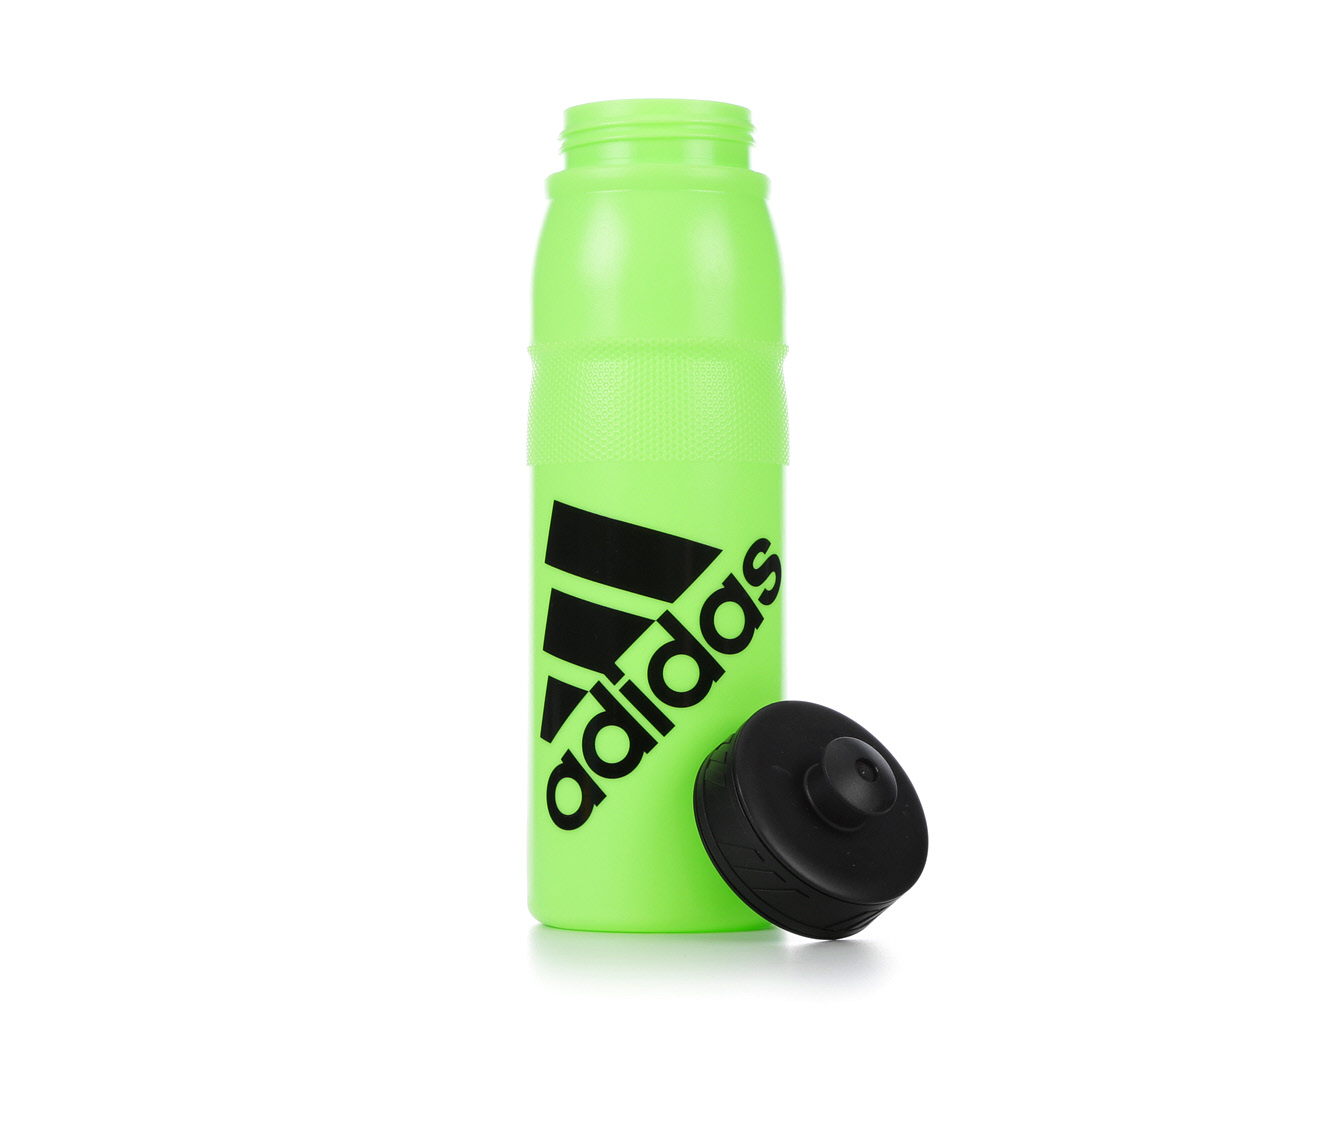 Adidas Accessories | Shoe Carnival